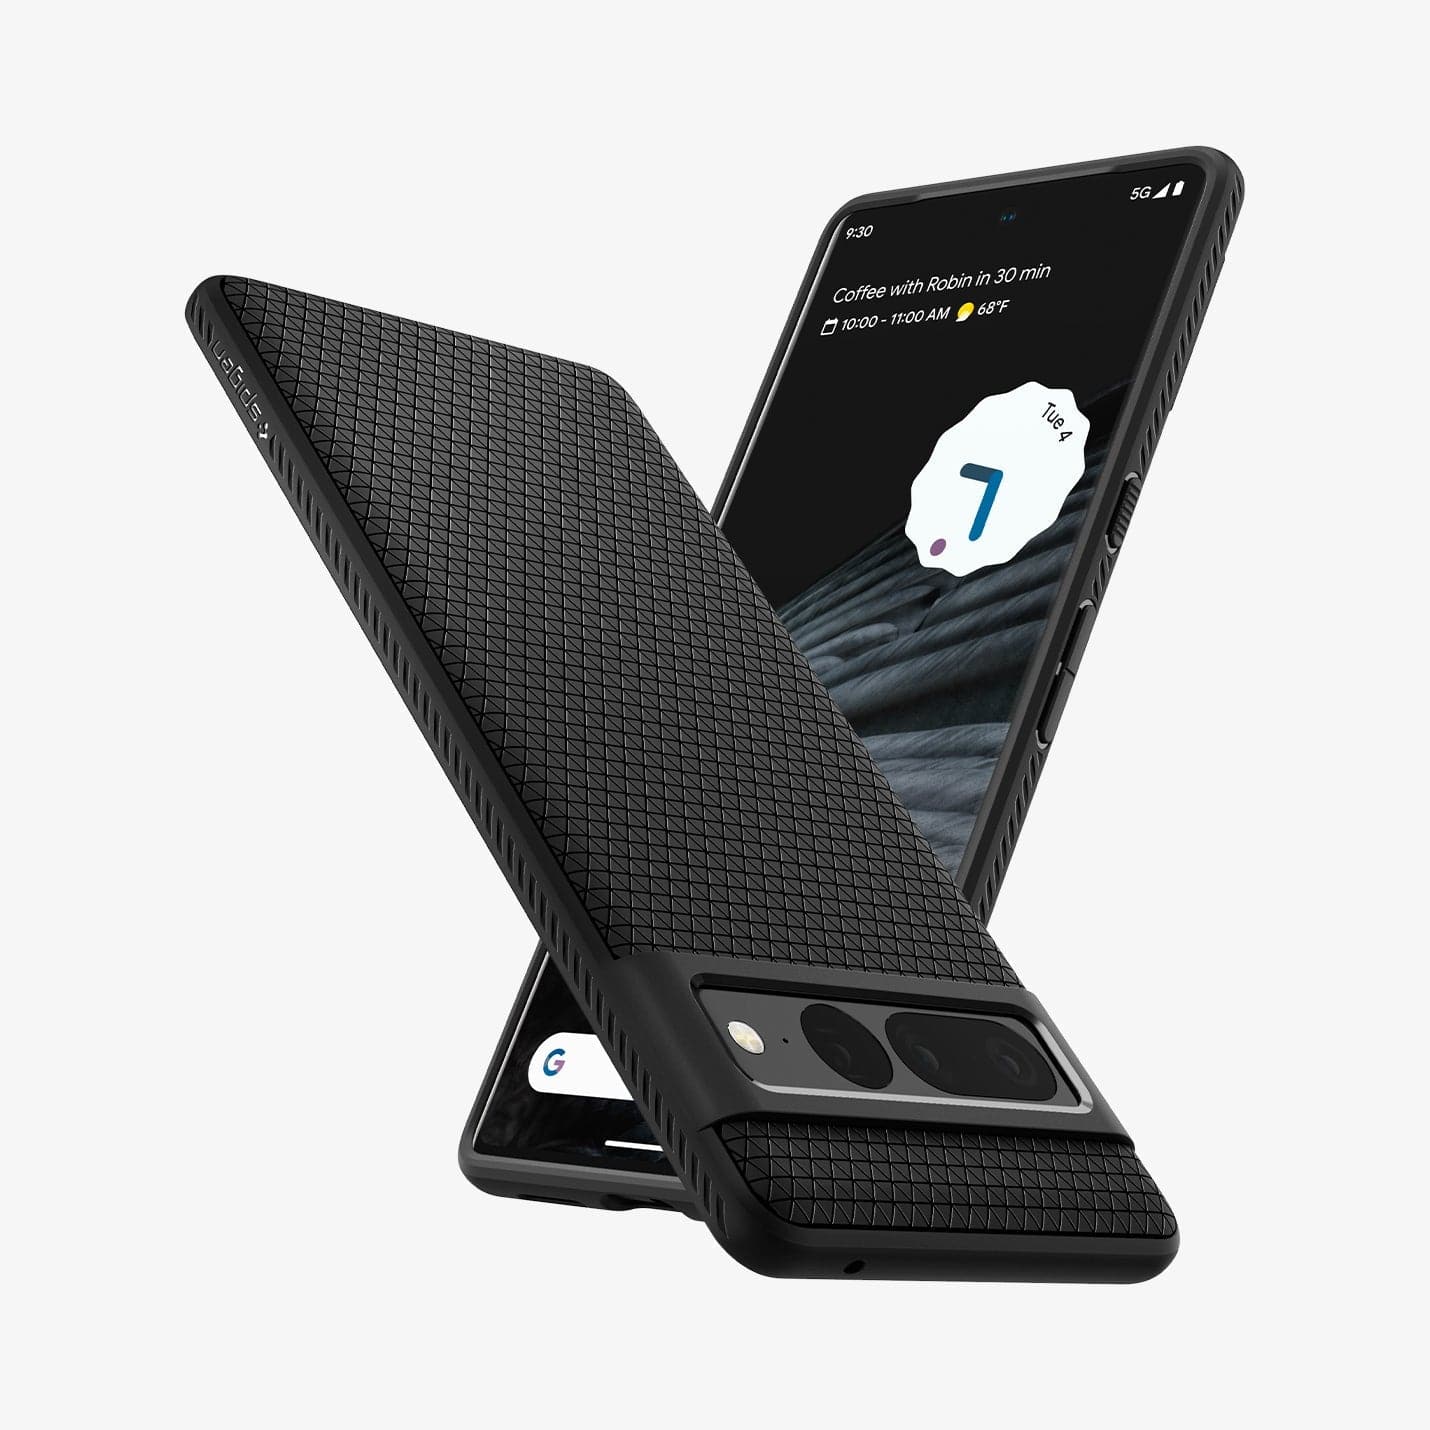 ACS04723 - Pixel 7 Pro Case Liquid Air in matte black showing the back, front and sides